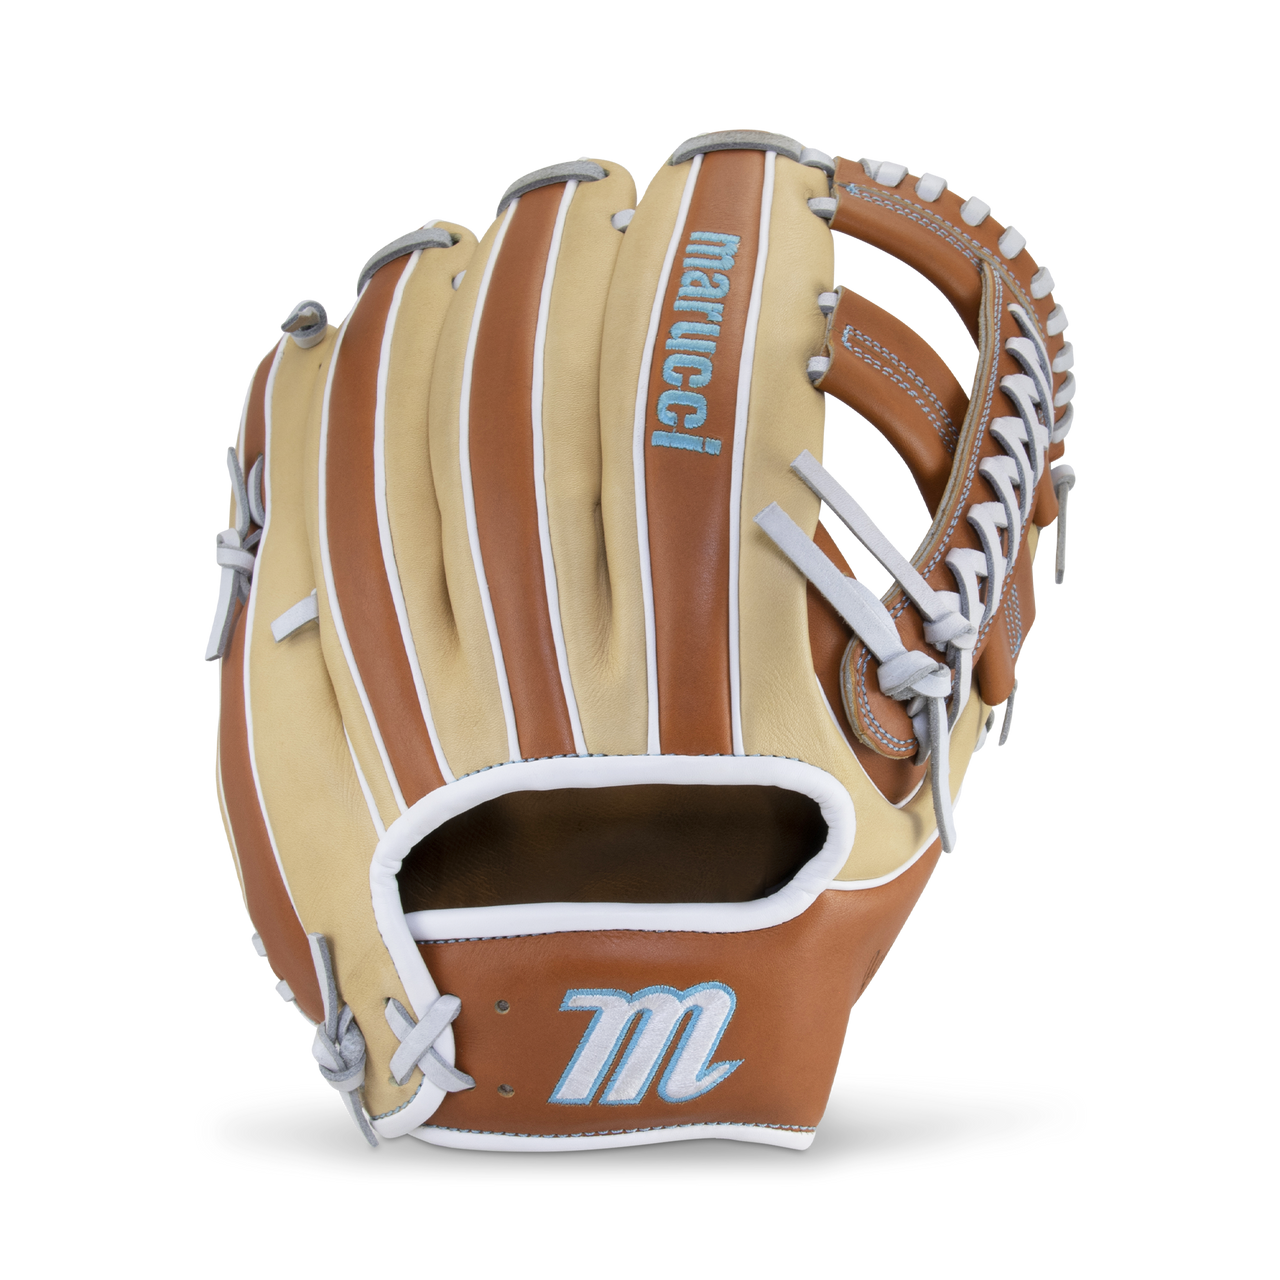 The ACADIA FASTPITCH M TYPE 45A5FP 12 BRAIDED POST is a premium softball glove designed to provide comfort, fit and performance. Equipped with the M Type fit system, it features integrated thumb and pinky sleeves, as well as a cushioned thumb stall, ensuring a secure and comfortable grip. The glove has a deep, dual wide shape, made from high-quality full-grain cowhide leather, and a supple leather palm lining with added cushioning for extra comfort. It also has a tapered hand stall for a customized fit and smooth microfiber wrist and finger linings for the younger player. The professional-grade rawhide laces provide durability, and the glove is available in both right and left-handed throw versions. The right-hand throw is recommended for pitcher, infield, and outfield positions, while the left-hand throw is best for pitcher and outfield positions.